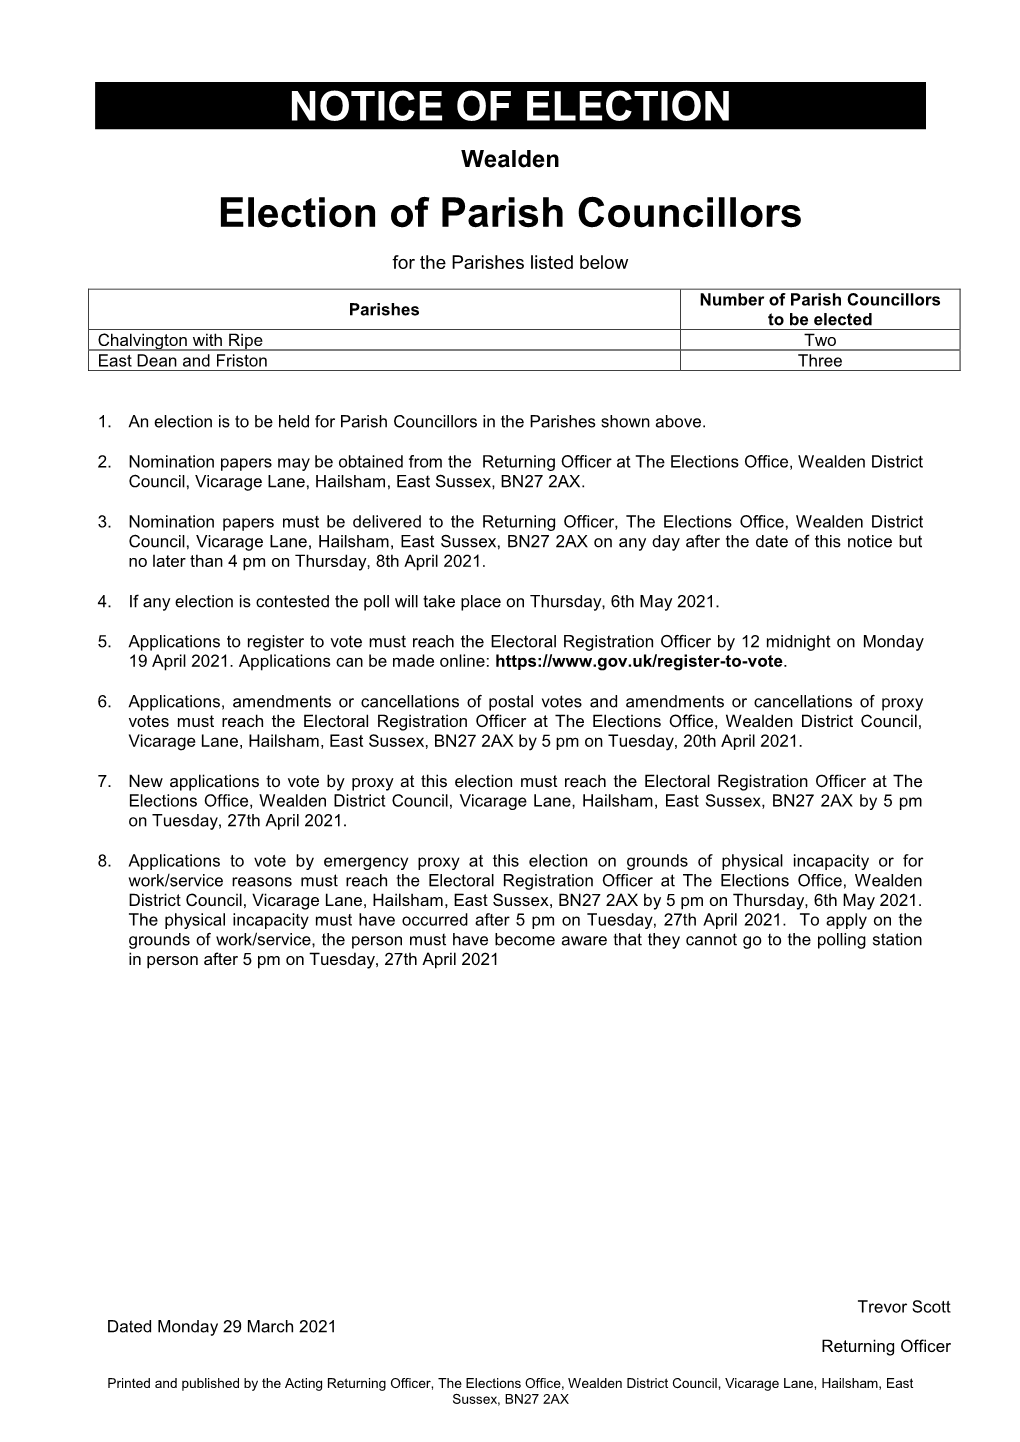 NOTICE of ELECTION Election of Parish Councillors